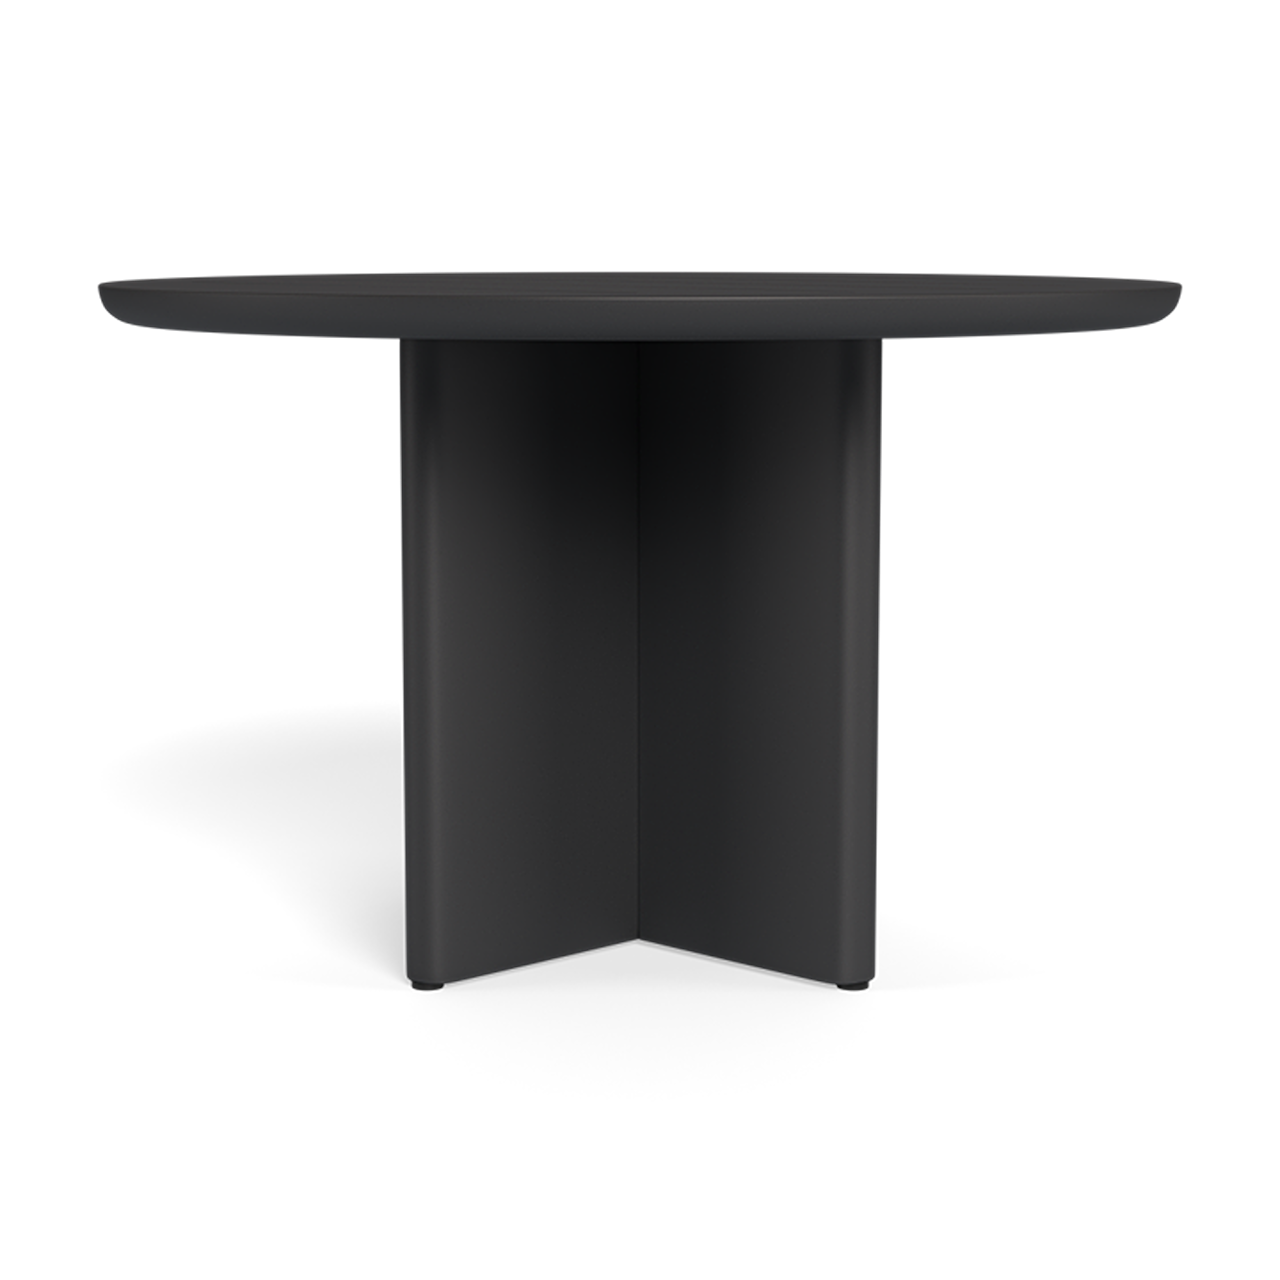 VICTORIA SLATTED ROUND DINING TABLE48_3-Aluminum Asteroid Frame